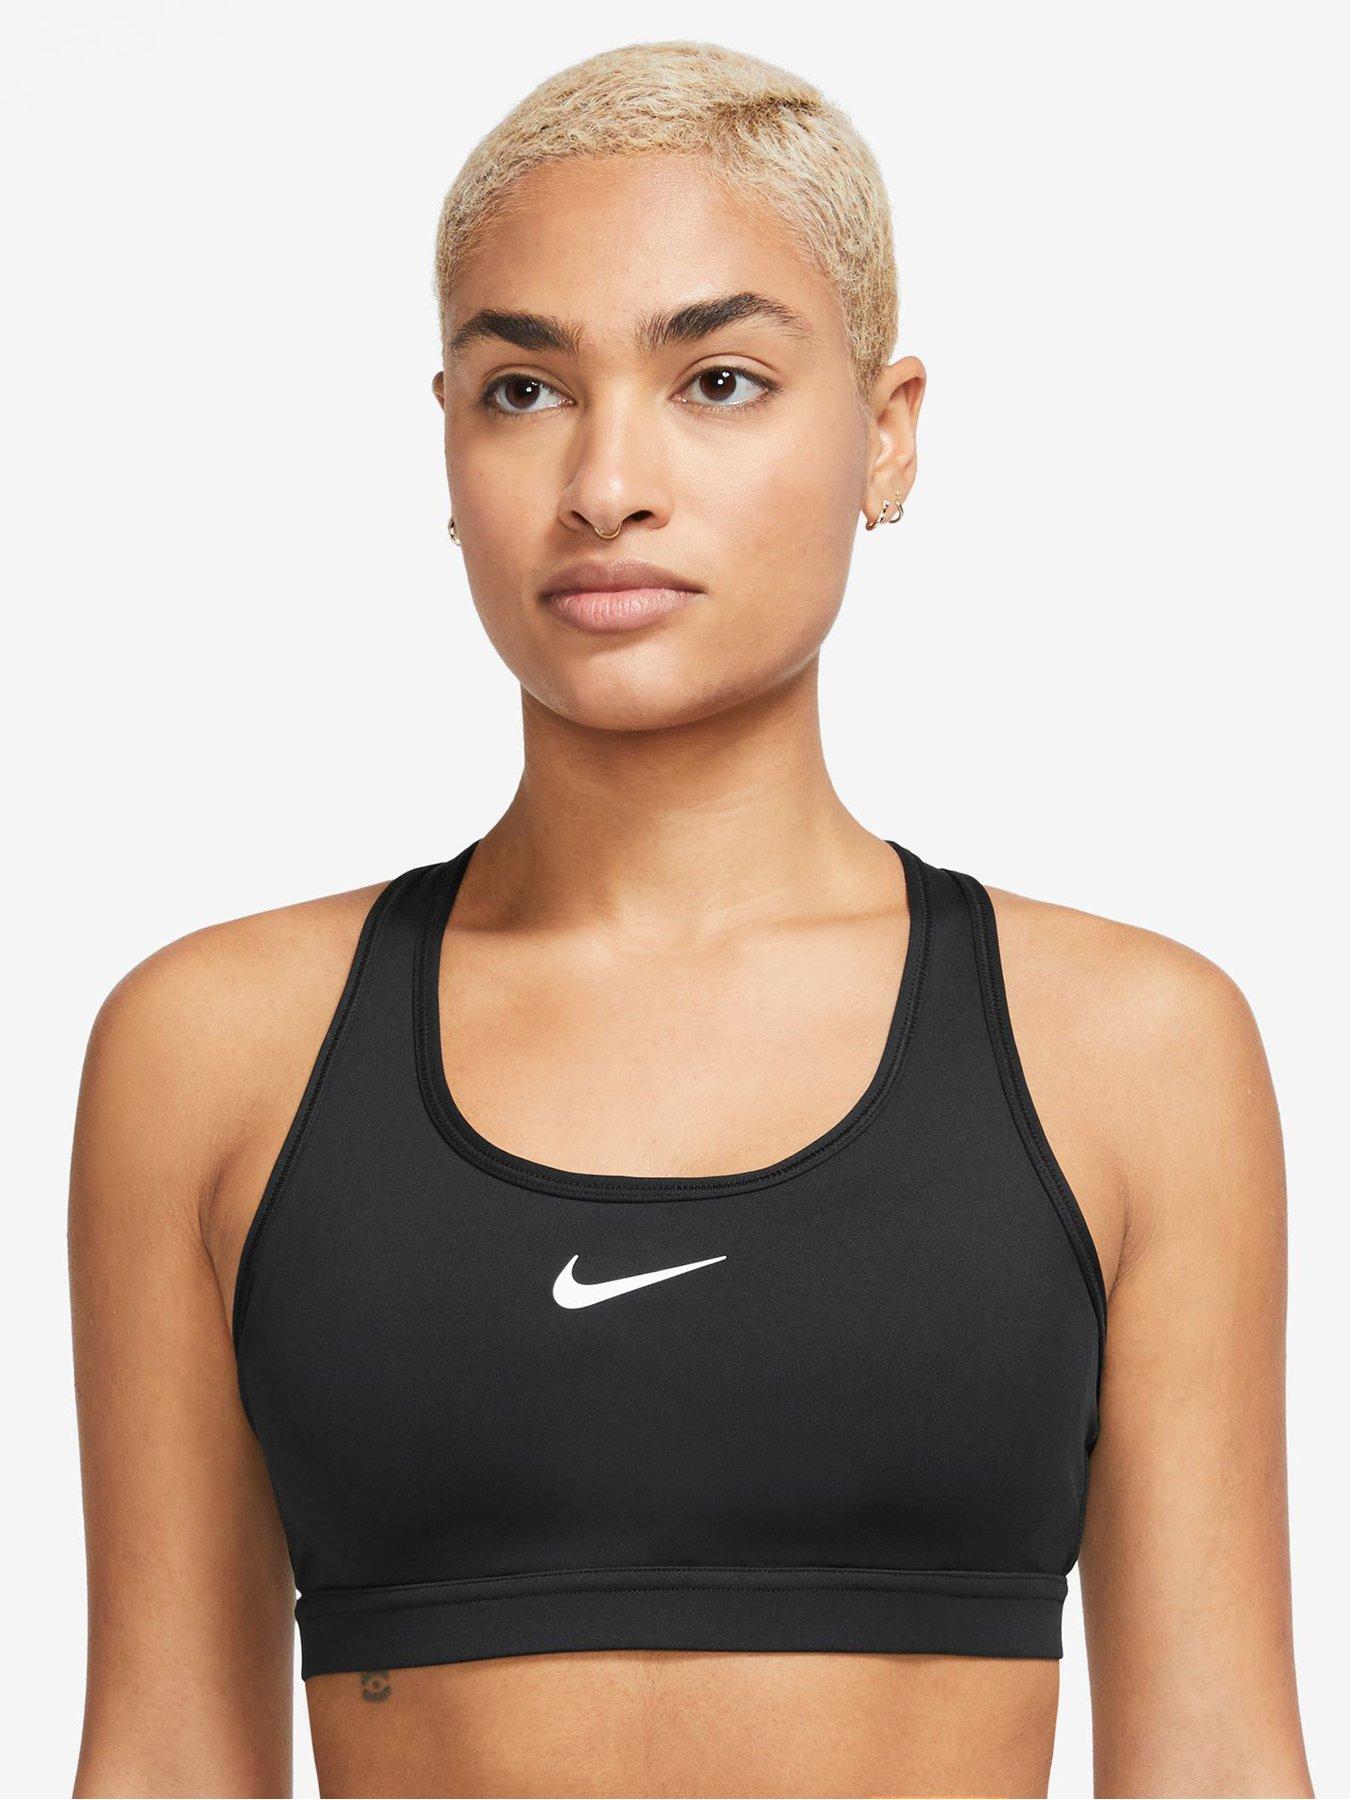 Buy your padded sports bra